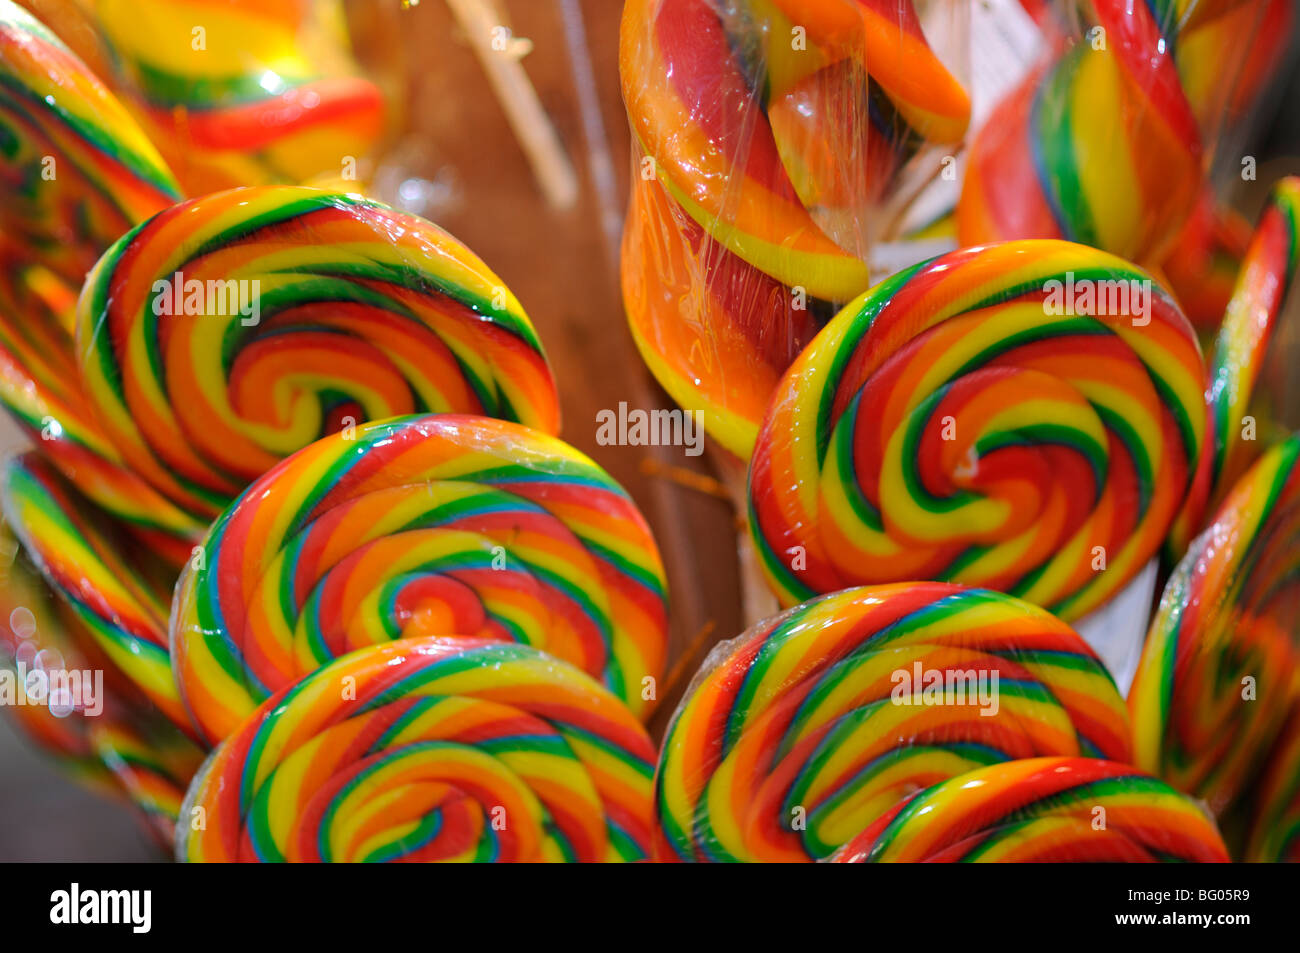 lollypops on sale in departure hall, International Airport, Kuala Lumpur Malaysia Stock Photo